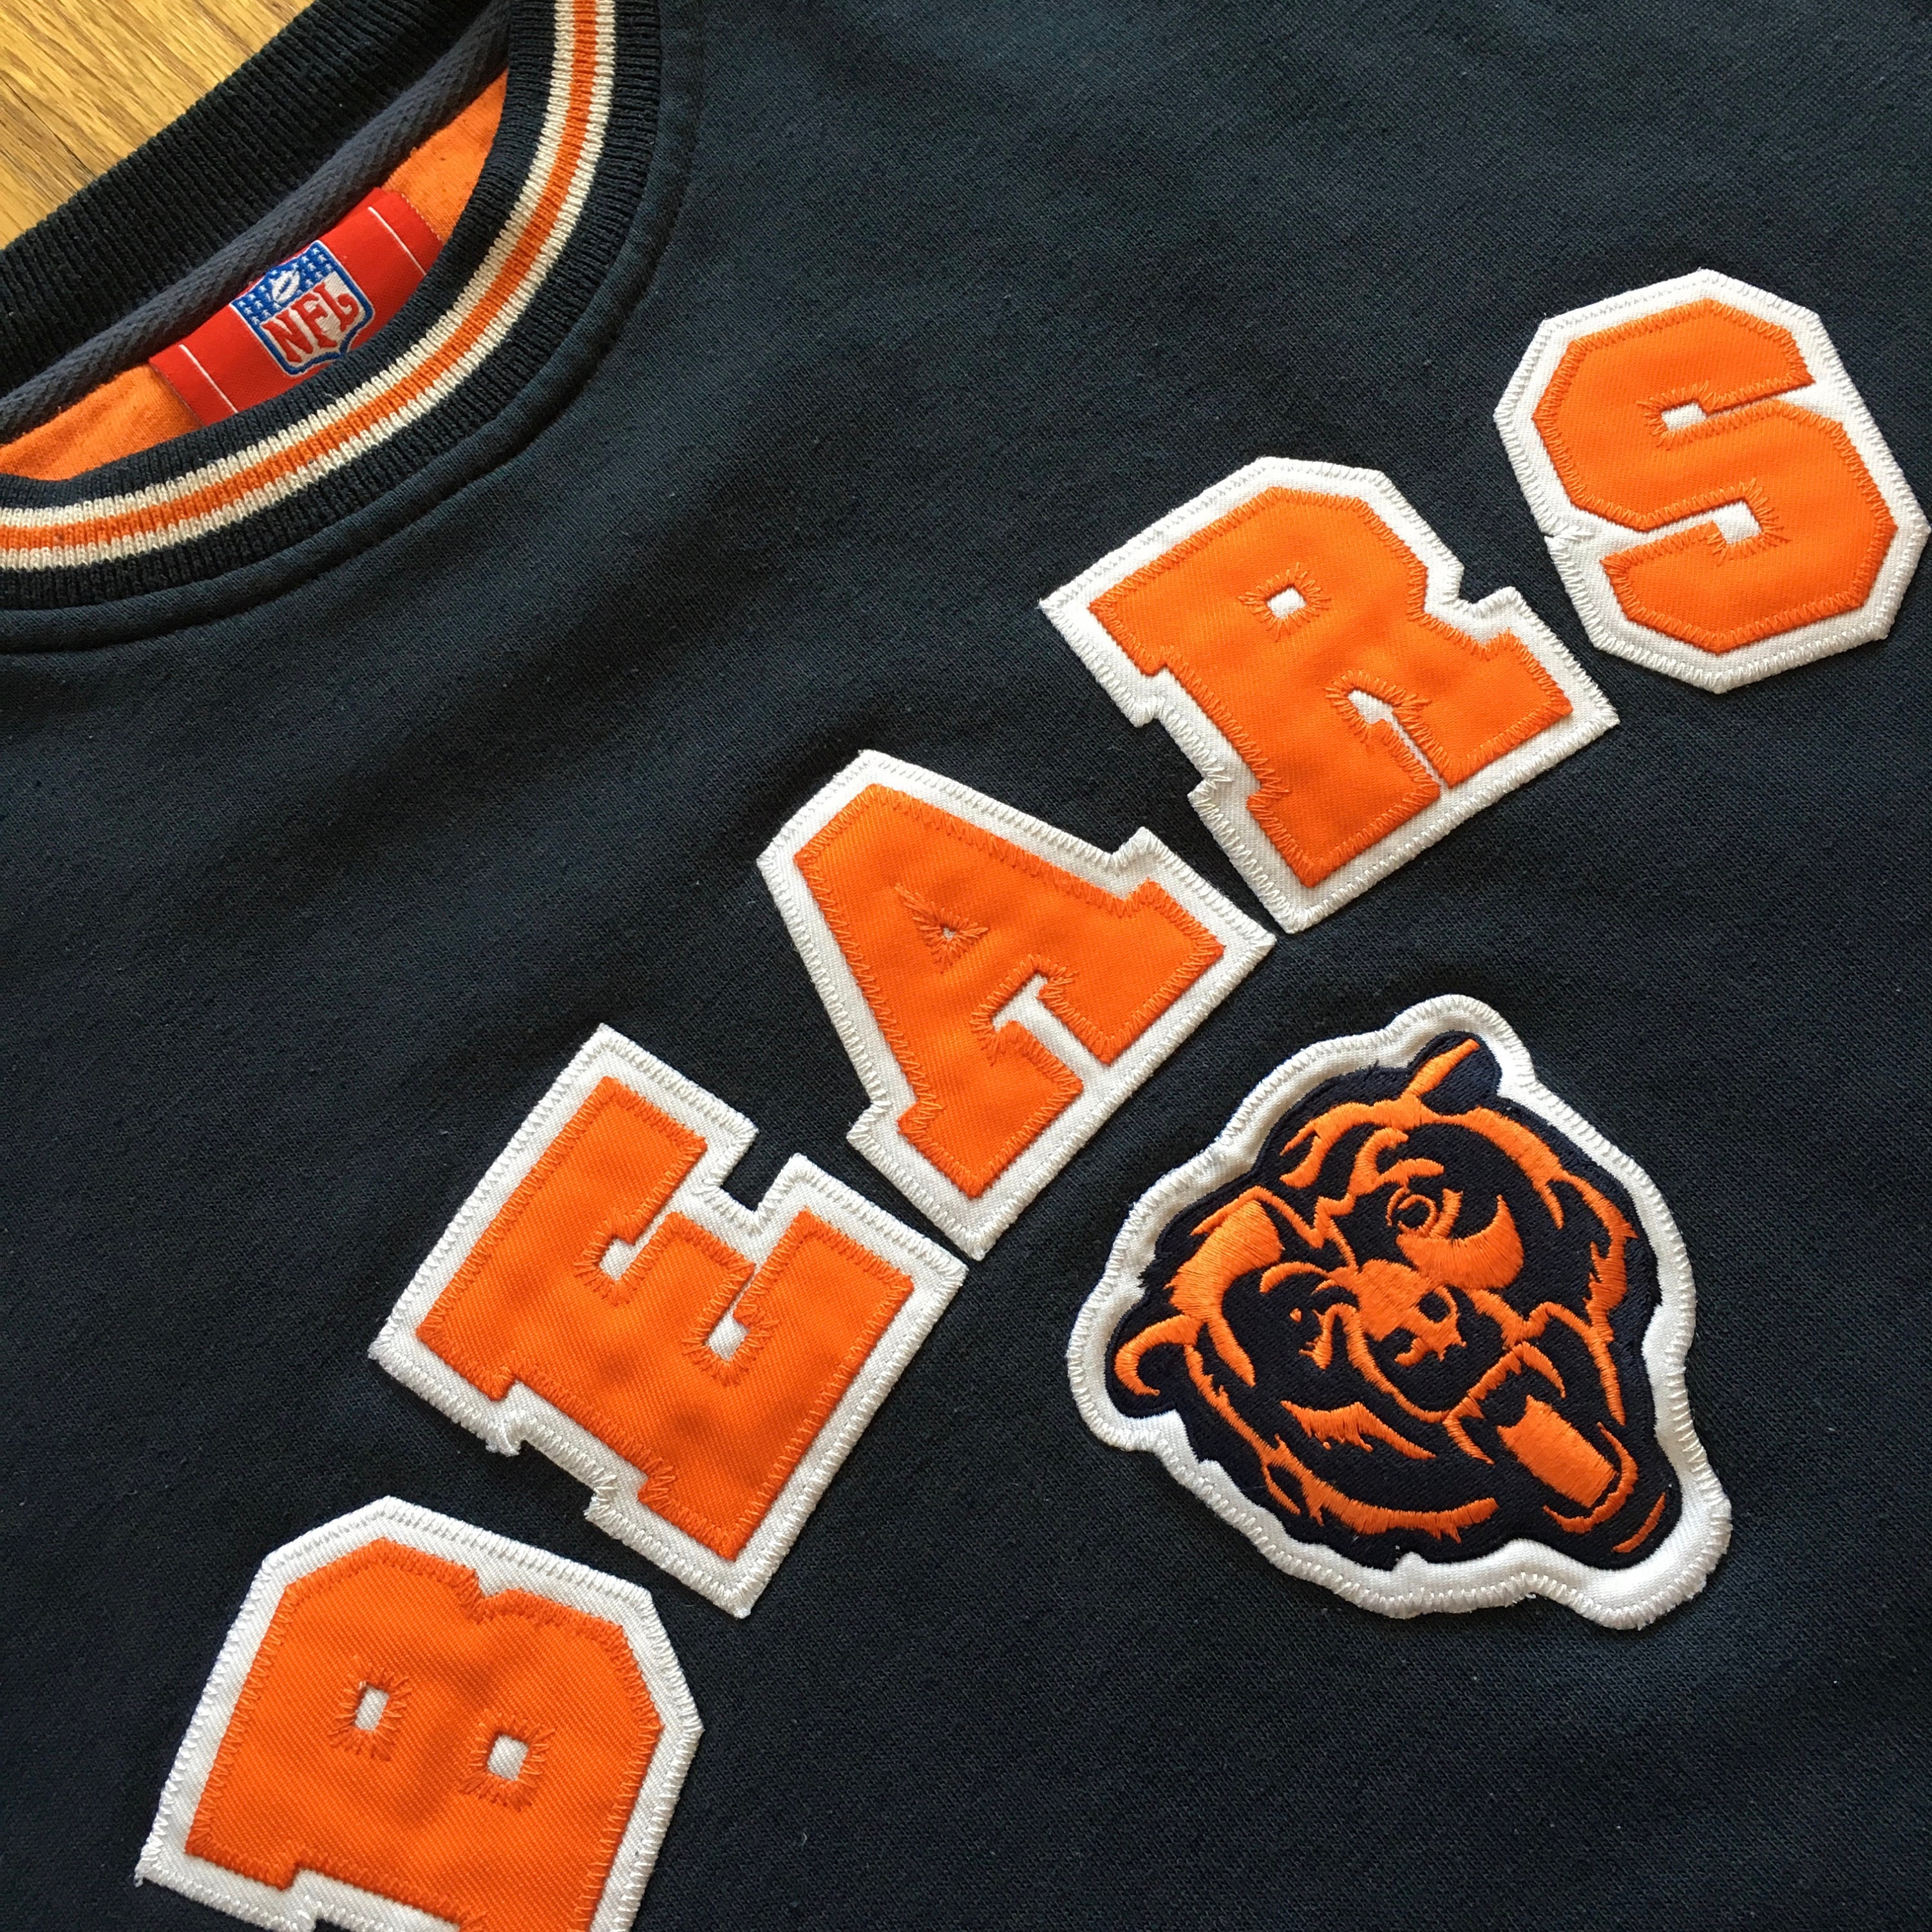 Embroidered Chicago Bears Sweatshirt | Hand Embroidery